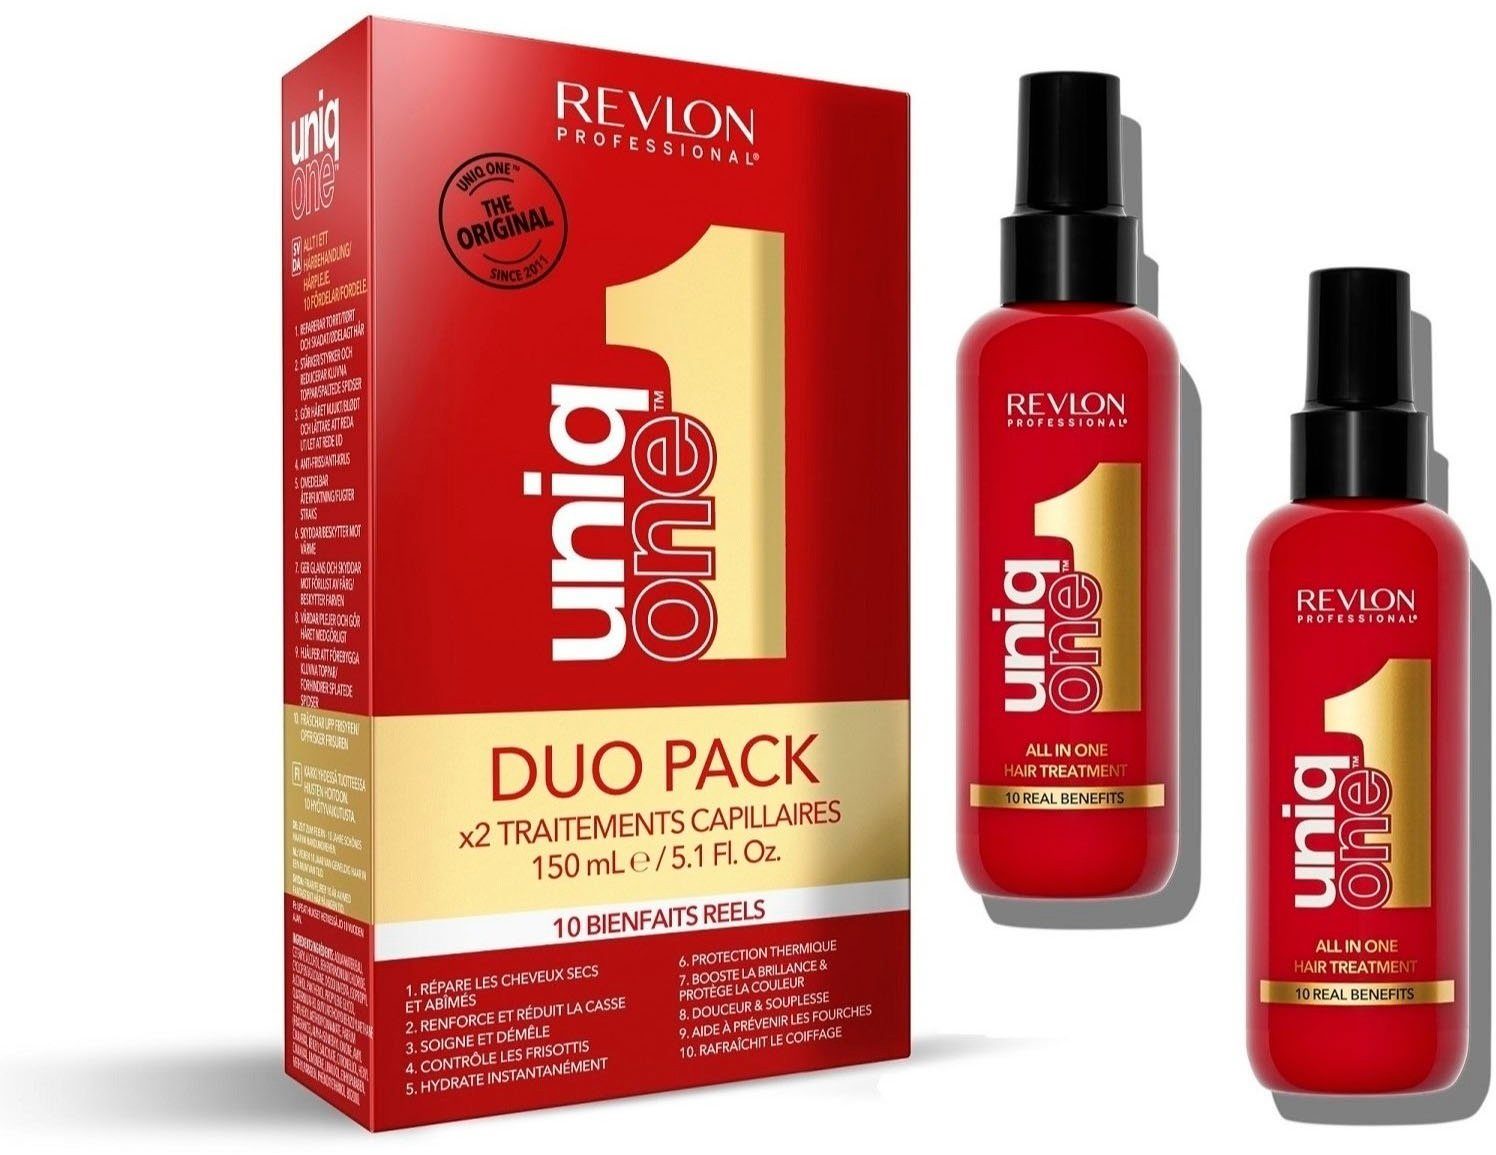 PROFESSIONAL Limited In Duopack REVLON Hair Leave-in Classic Uniqone Haarpflege-Set Set, One Treatment 2-tlg., Edition All Pflege Spar-Set,